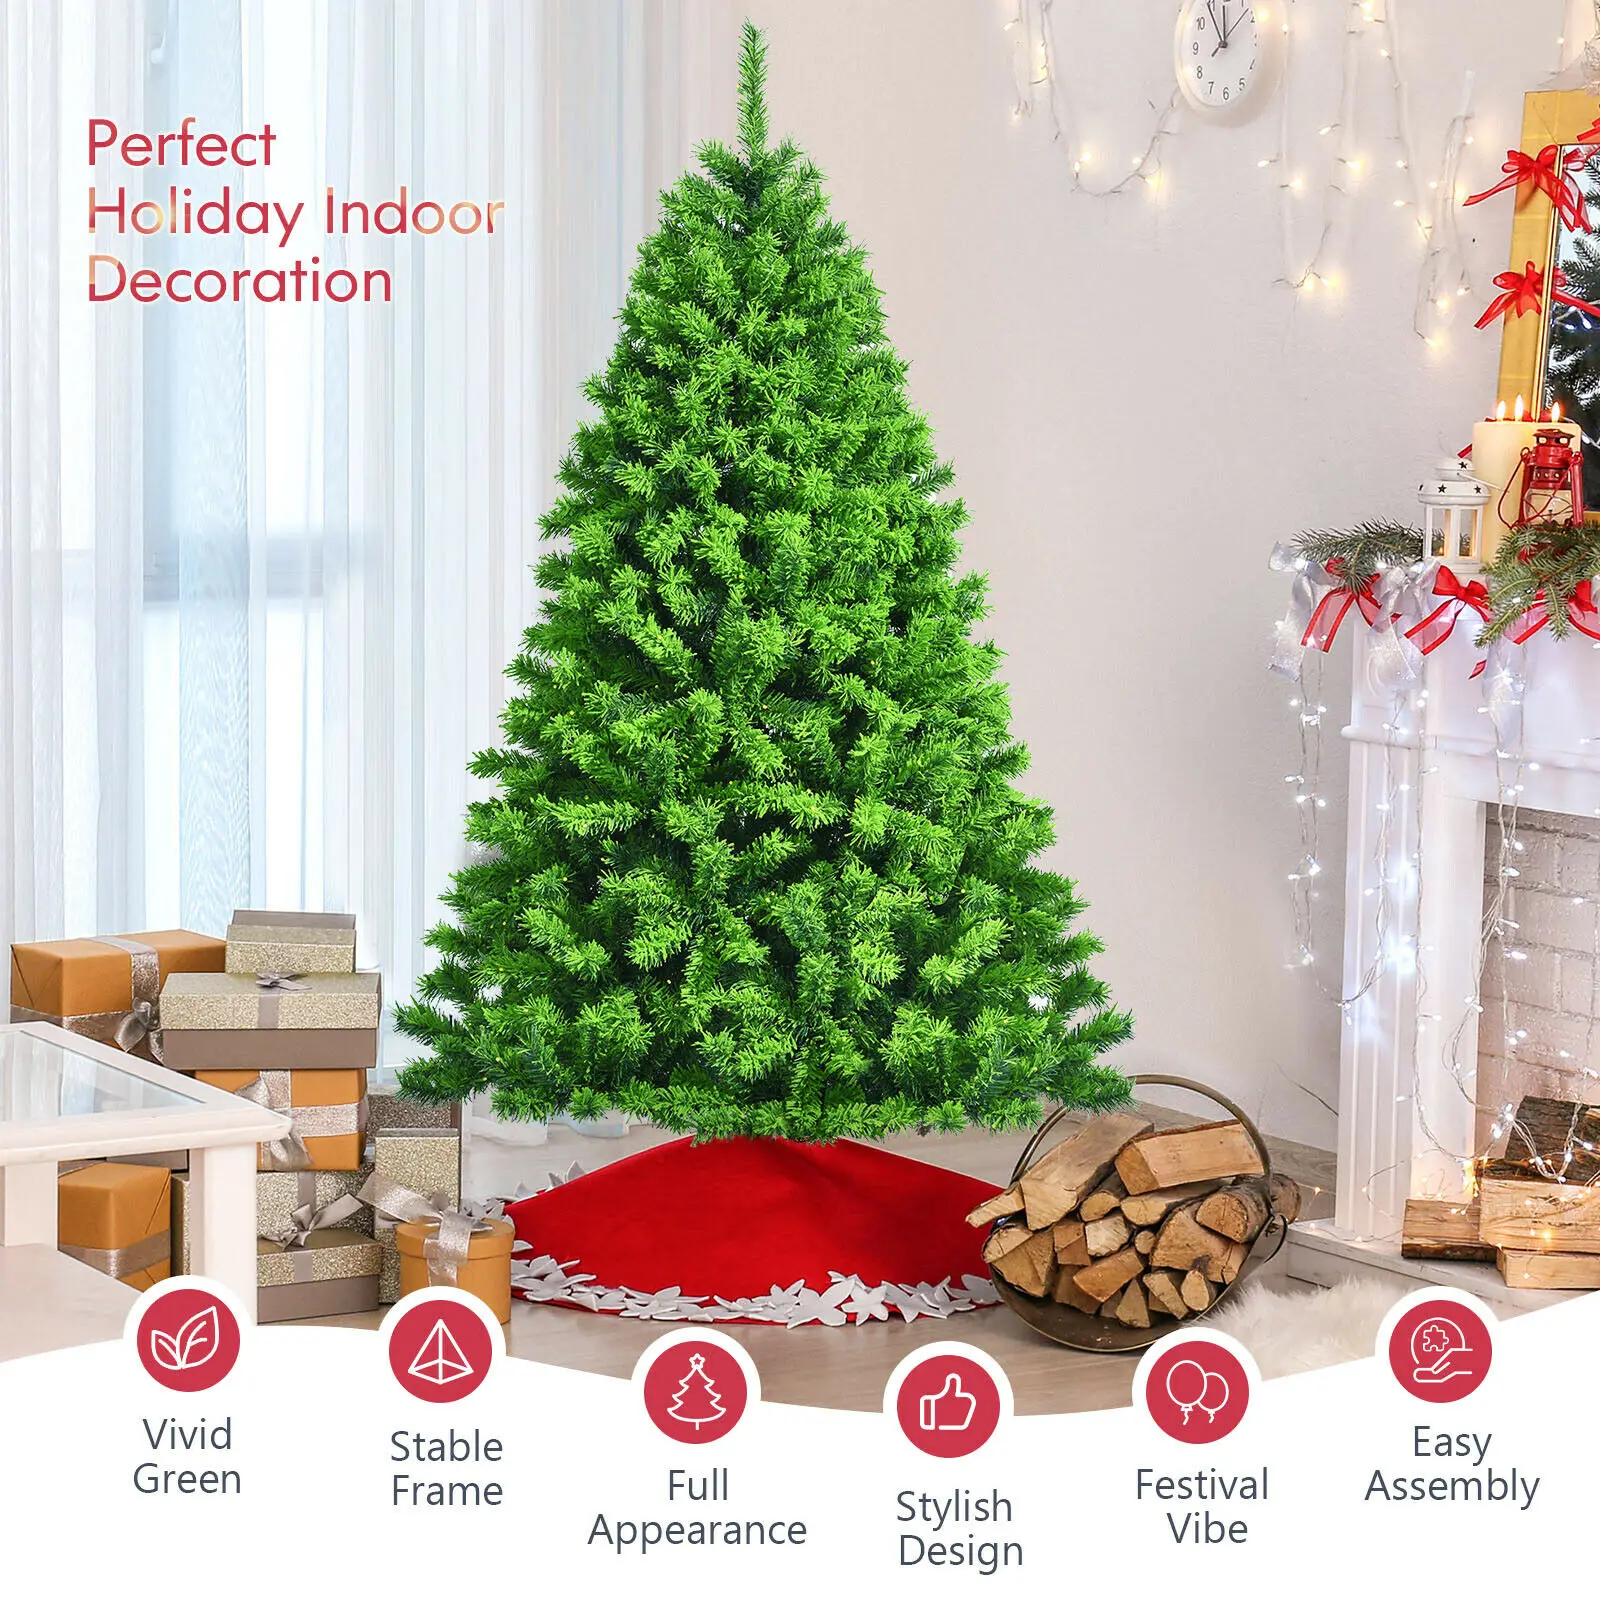 Costway 7.5ft Pre-Lit Hinged Christmas Tree Snow Flocked w/9 Modes Remote Control Lights